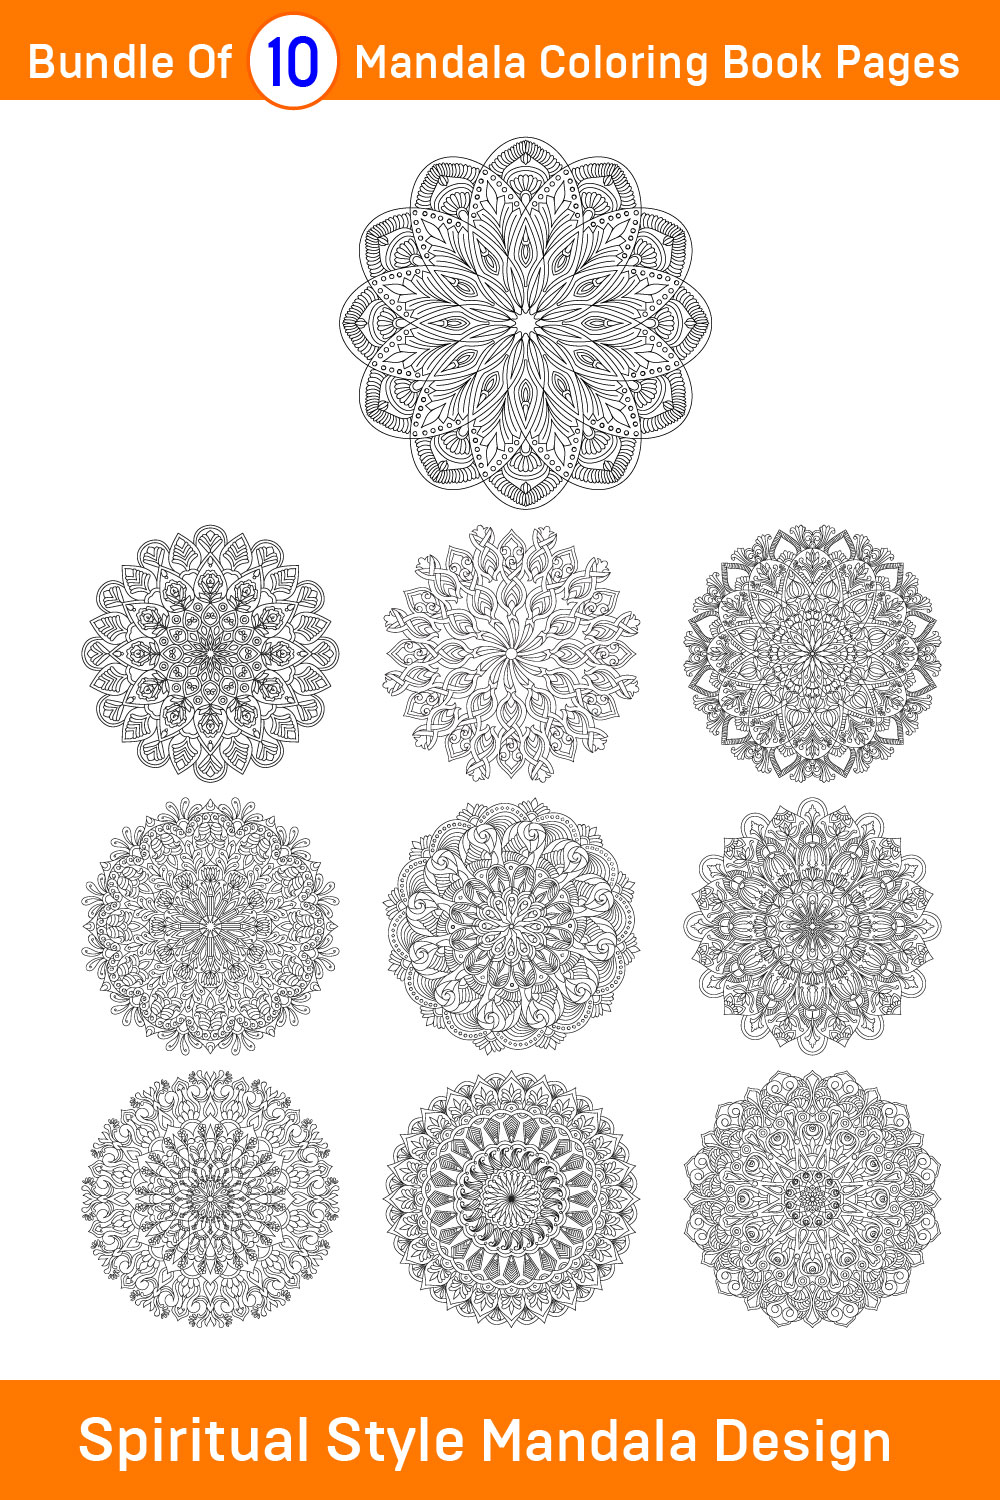 Bundle of 10 Spiritual Style Mandala Coloring Book Pages pinterest preview image.